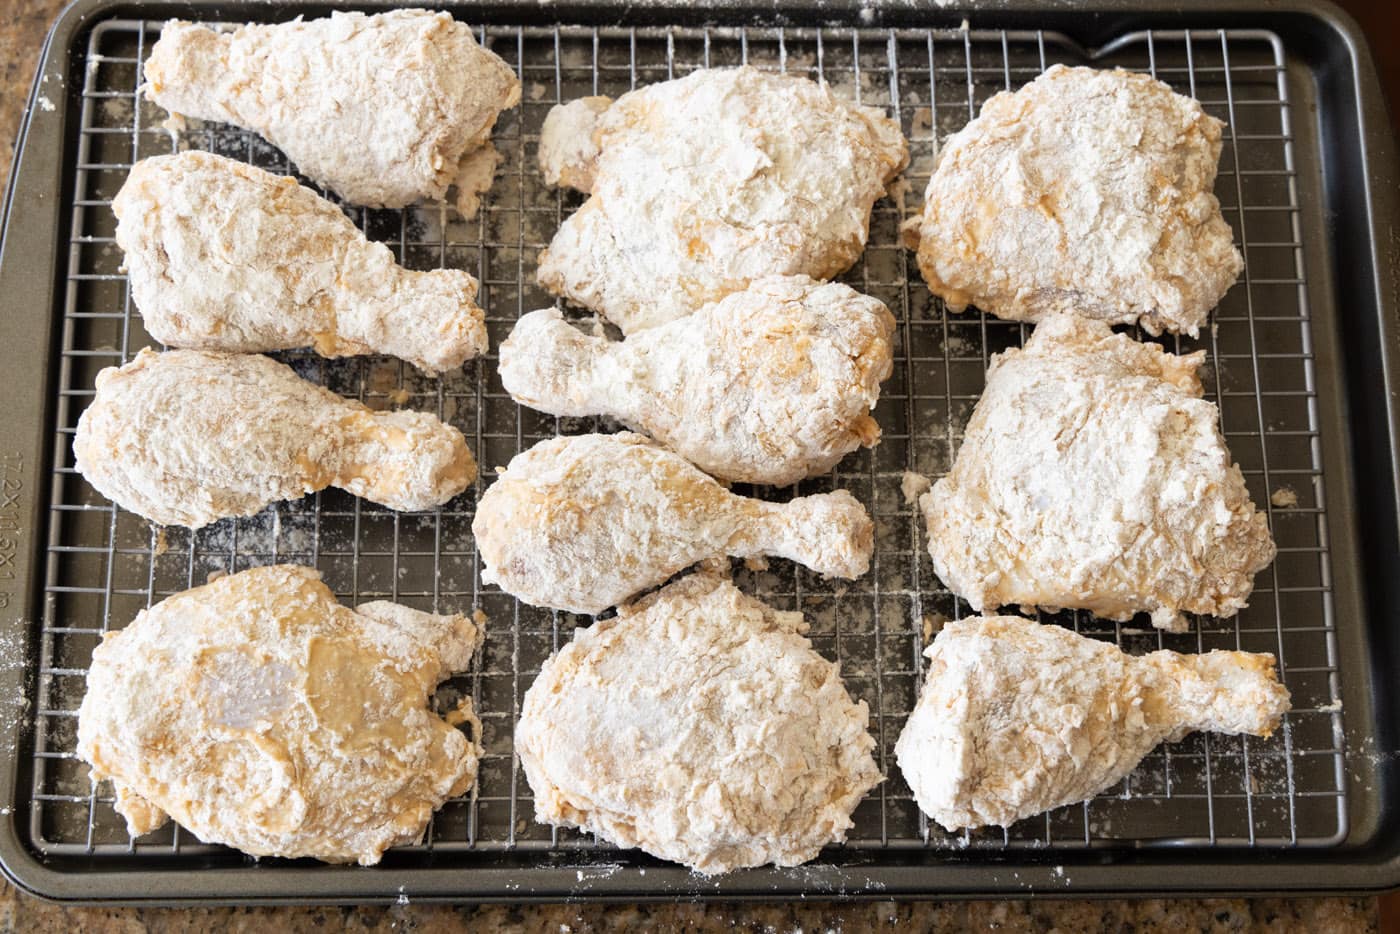 flour and egg dredged chicken thighs and legs on a baking sheet